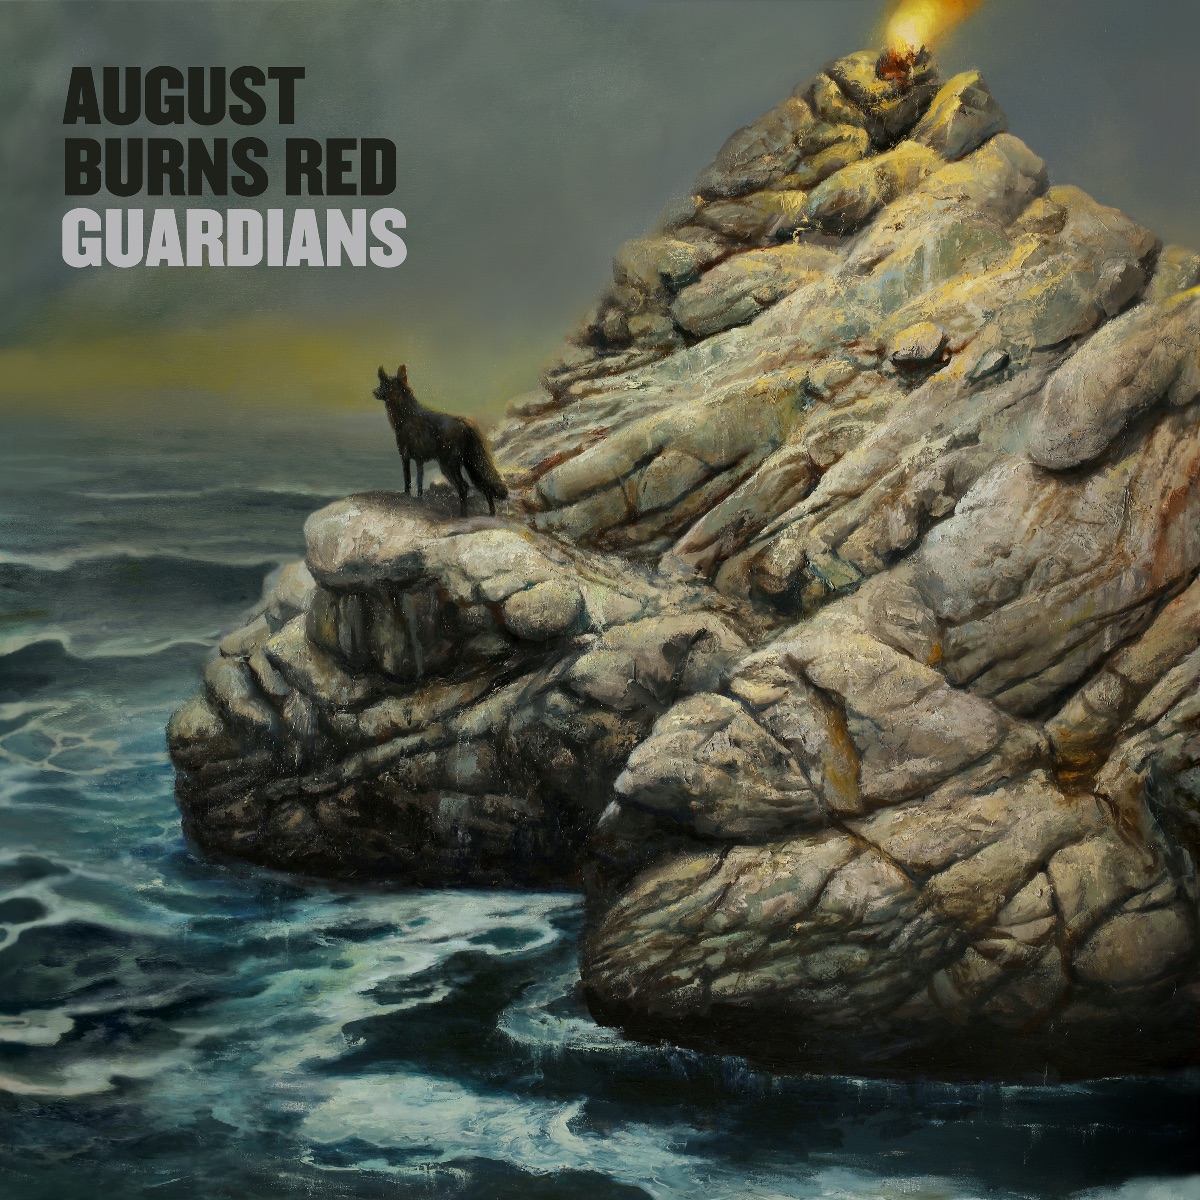 August Burns Red's "Guardians" Is No. 1